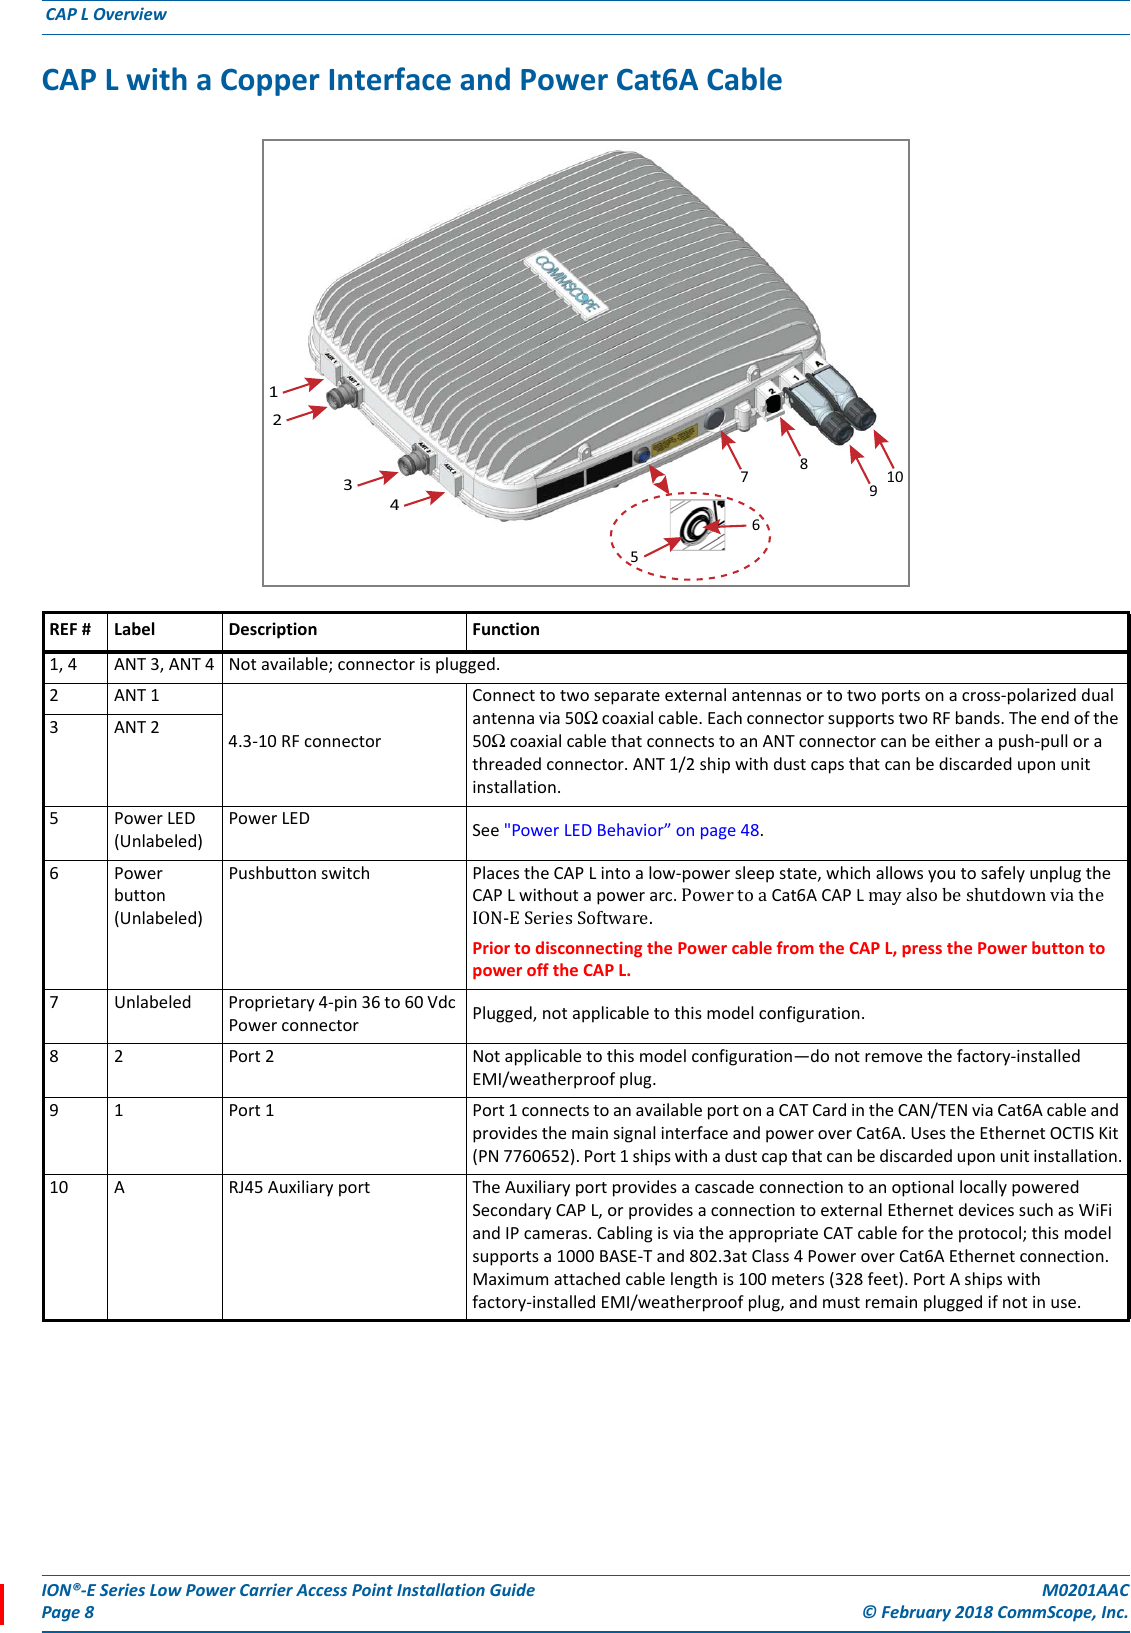 ION®-E Series Low Power Carrier Access Point Installation Guide M0201AACPage 8 © February 2018 CommScope, Inc. CAP L Overview  CAP L with a Copper Interface and Power Cat6A CableREF # Label Description Function1, 4 ANT 3, ANT 4 Not available; connector is plugged.2ANT 1 4.3-10 RF connectorConnect to two separate external antennas or to two ports on a cross-polarized dual antenna via 50Ω coaxial cable. Each connector supports two RF bands. The end of the 50Ω coaxial cable that connects to an ANT connector can be either a push-pull or a threaded connector. ANT 1/2 ship with dust caps that can be discarded upon unit installation. 3ANT 25Power LED (Unlabeled)Power LED See &quot;Power LED Behavior” on page 48.6Power button (Unlabeled)Pushbutton switch Places the CAP L into a low-power sleep state, which allows you to safely unplug the CAP L without a power arc. PowertoaCat6A CAP L mayalsobeshutdownviatheION-ESeriesSoftware.Prior to disconnecting the Power cable from the CAP L, press the Power button to power off the CAP L. 7 Unlabeled  Proprietary 4-pin 36 to 60 Vdc Power connector Plugged, not applicable to this model configuration.8 2  Port 2 Not applicable to this model configuration—do not remove the factory-installed EMI/weatherproof plug.9 1  Port 1 Port 1 connects to an available port on a CAT Card in the CAN/TEN via Cat6A cable and provides the main signal interface and power over Cat6A. Uses the Ethernet OCTIS Kit (PN 7760652). Port 1 ships with a dust cap that can be discarded upon unit installation.10 A RJ45 Auxiliary port The Auxiliary port provides a cascade connection to an optional locally powered Secondary CAP L, or provides a connection to external Ethernet devices such as WiFi and IP cameras. Cabling is via the appropriate CAT cable for the protocol; this model supports a 1000 BASE-T and 802.3at Class 4 Power over Cat6A Ethernet connection. Maximum attached cable length is 100 meters (328 feet). Port A ships with factory-installed EMI/weatherproof plug, and must remain plugged if not in use. 12347891056